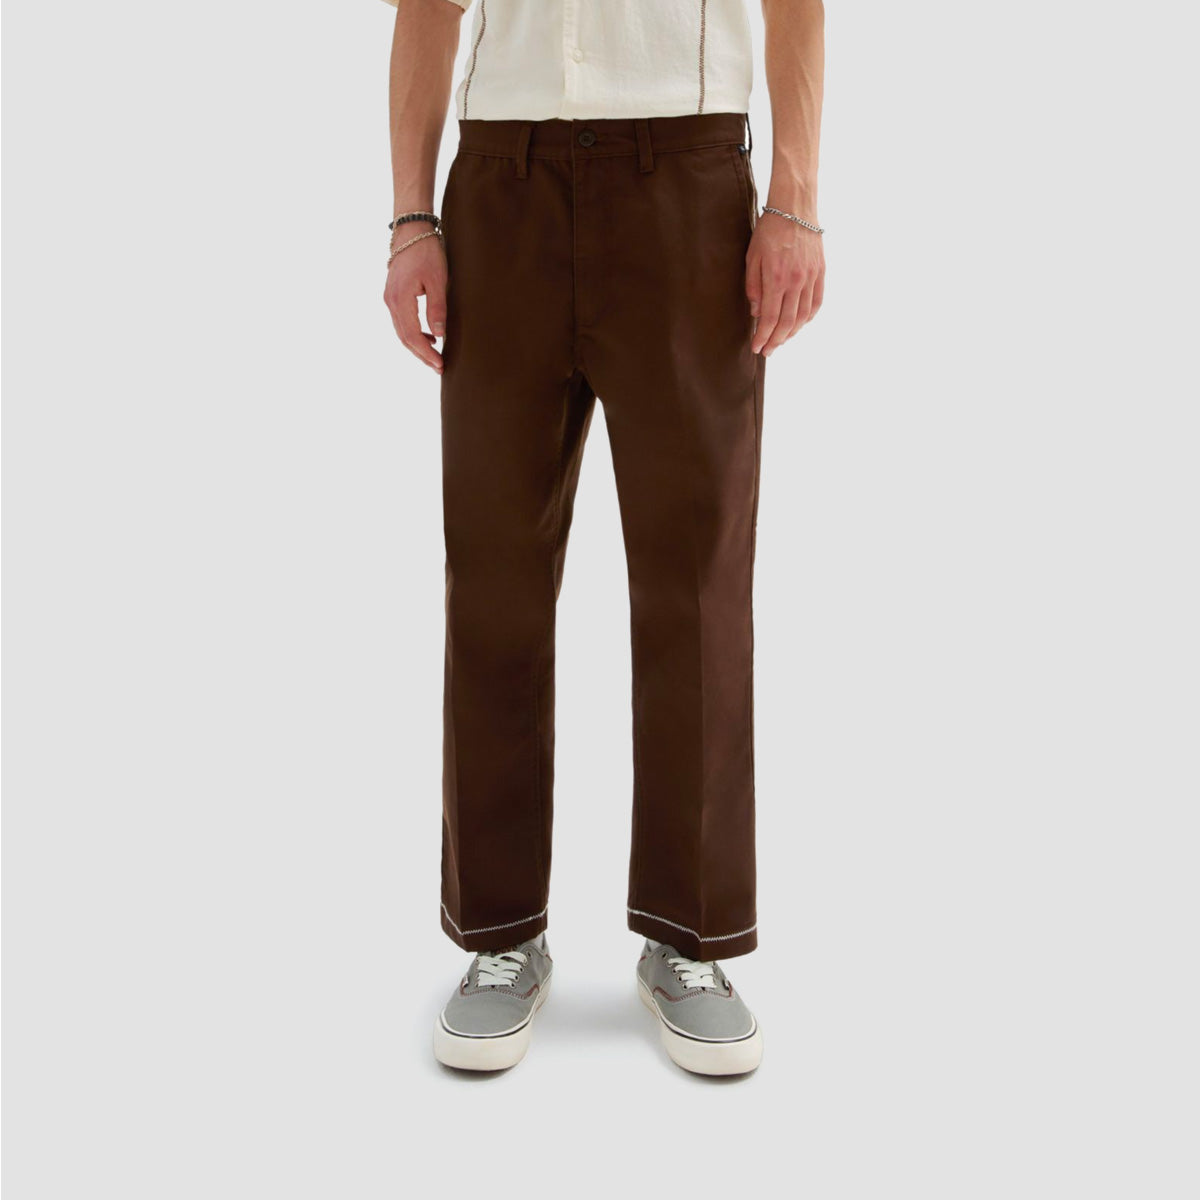 Vans Michael February Authentic Relaxed Cropped Chino Pants Demitasse